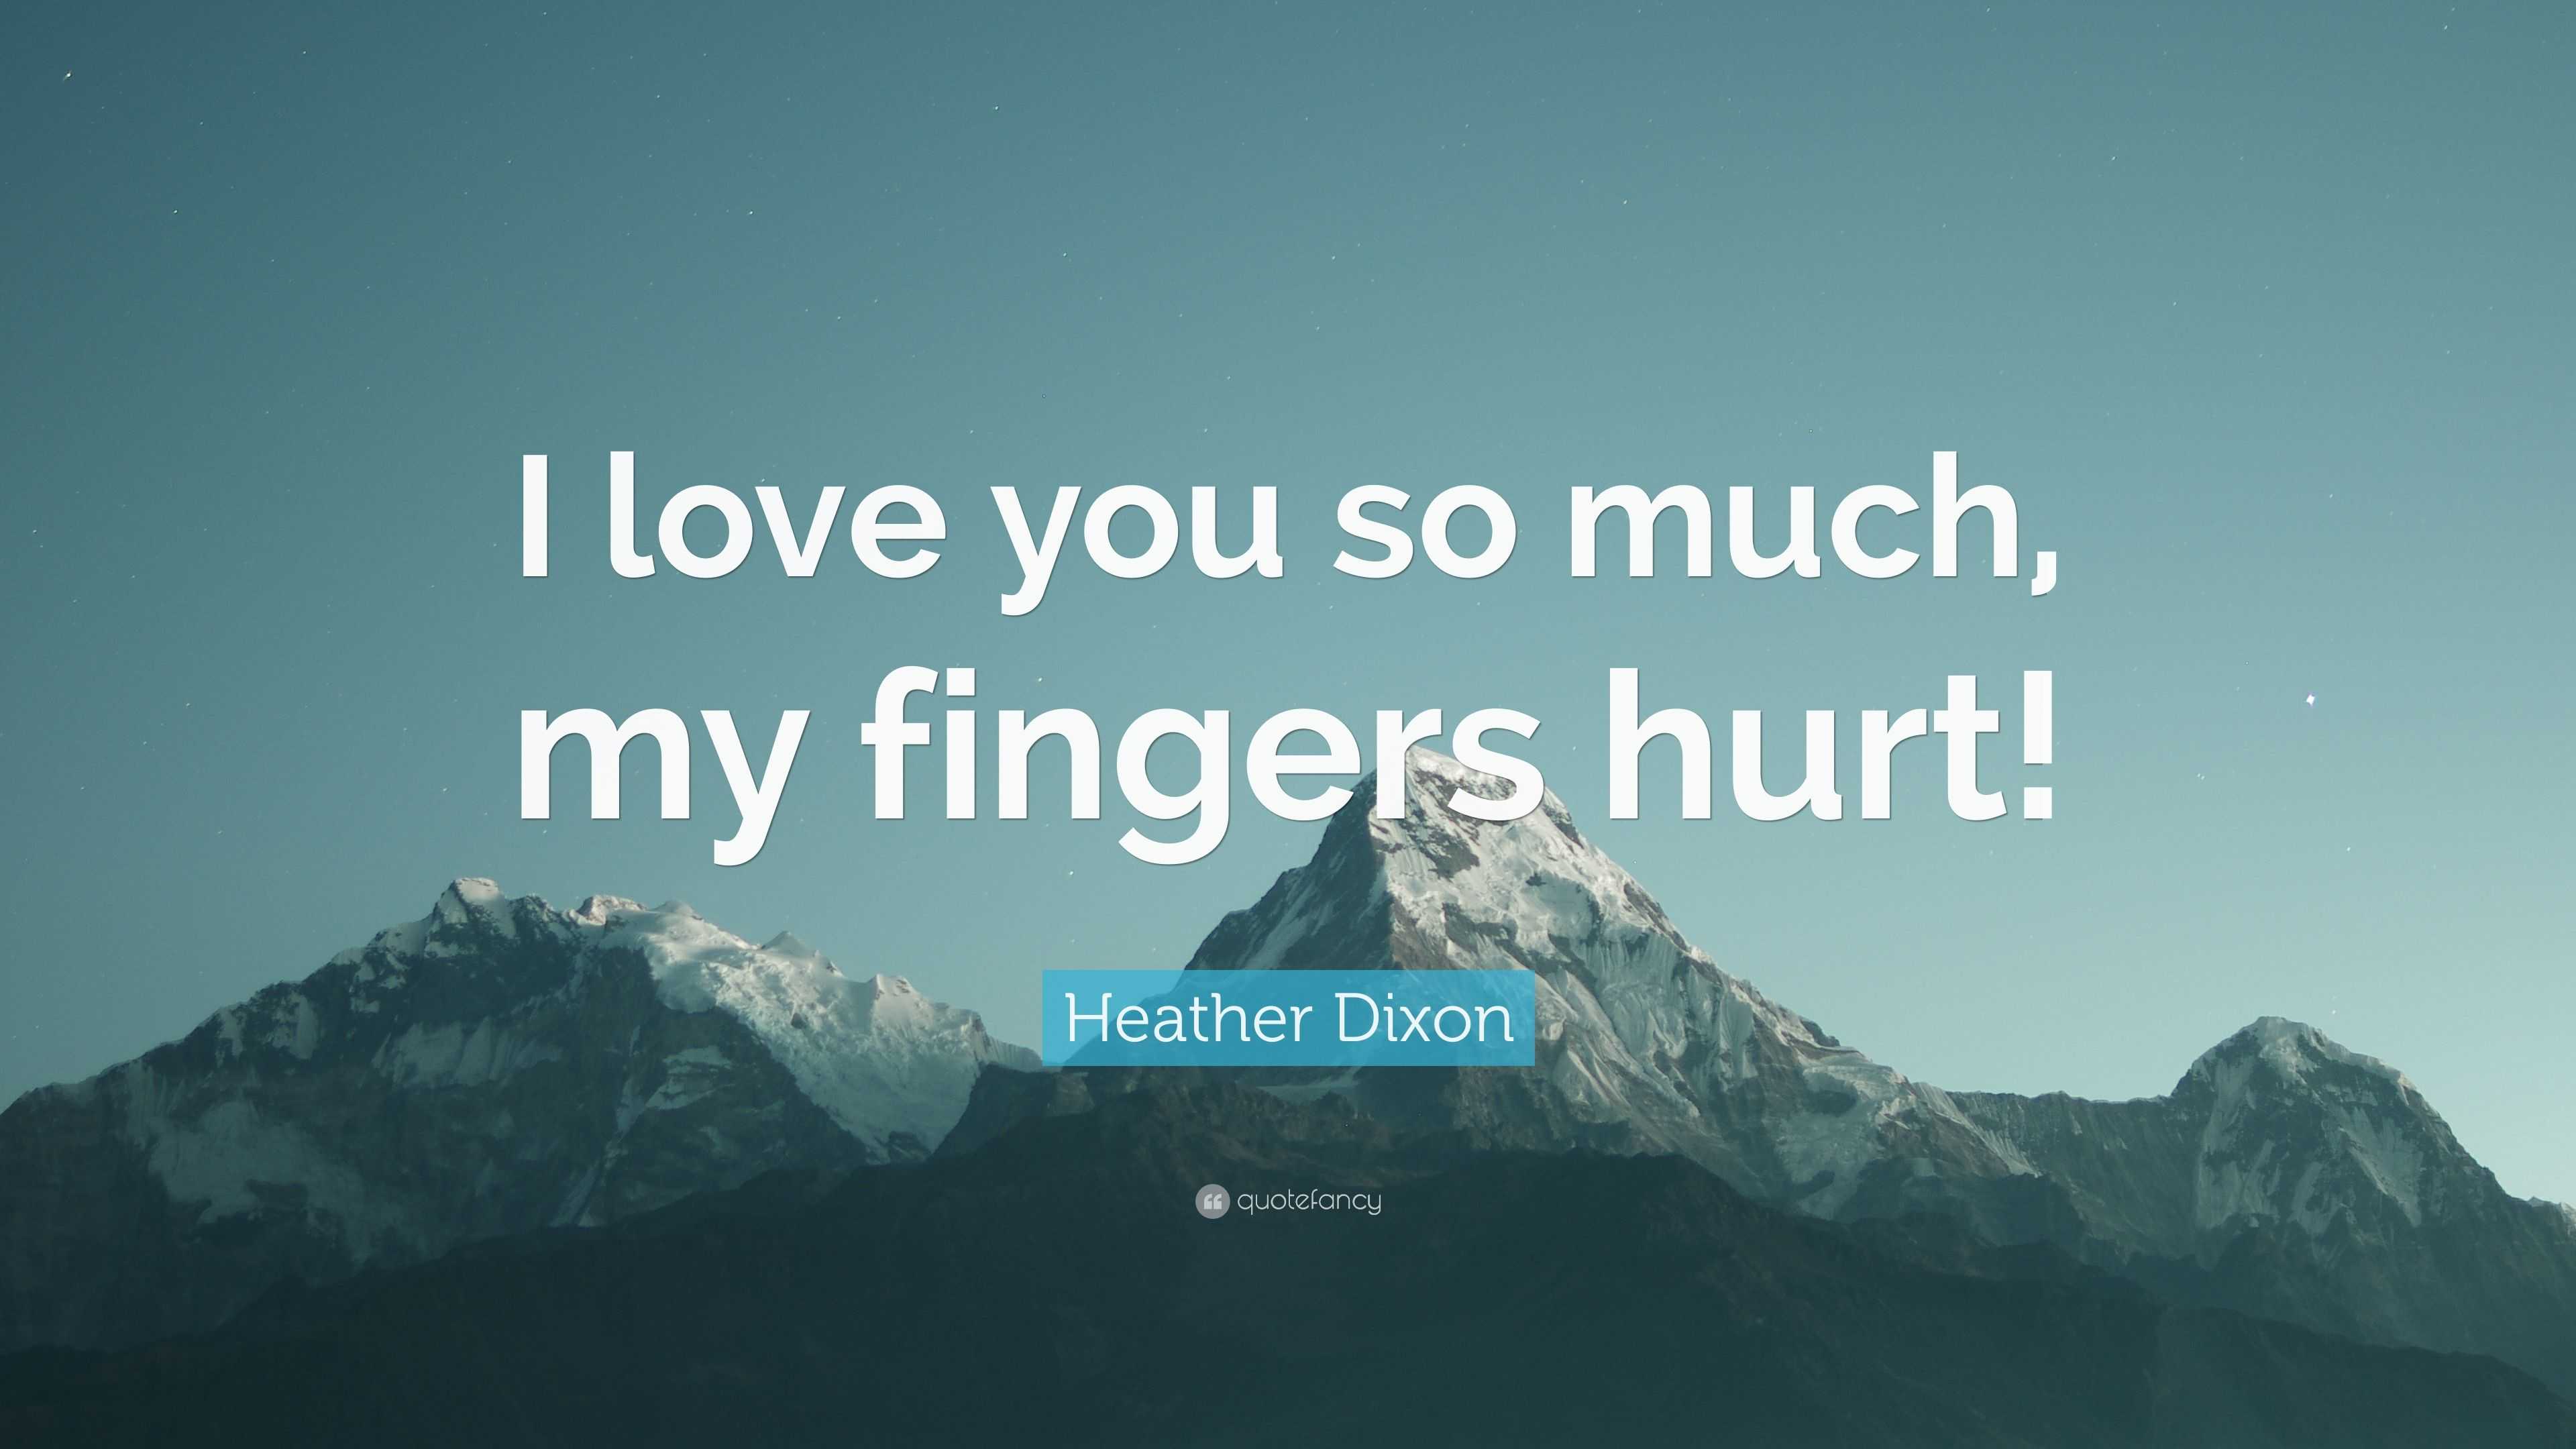 Heather Dixon Quote “I love you so much my fingers hurt ”